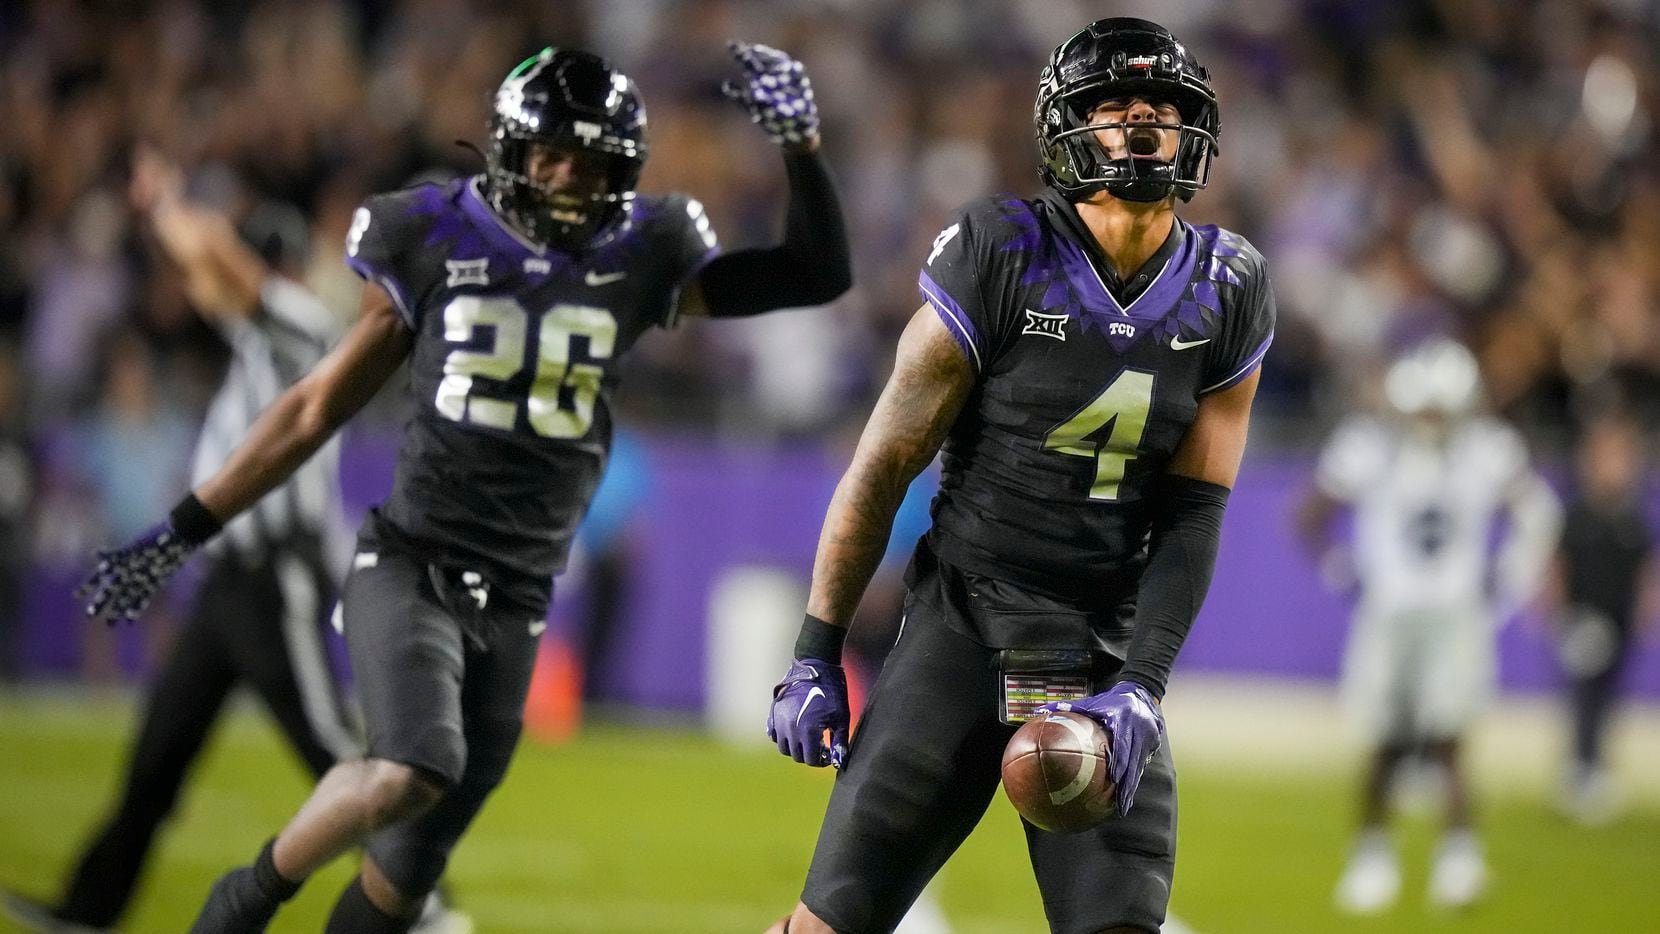 TCU safety Namdi Obiazor (4) celebrates with safety Bud Clark (26) after breaking up a pass...